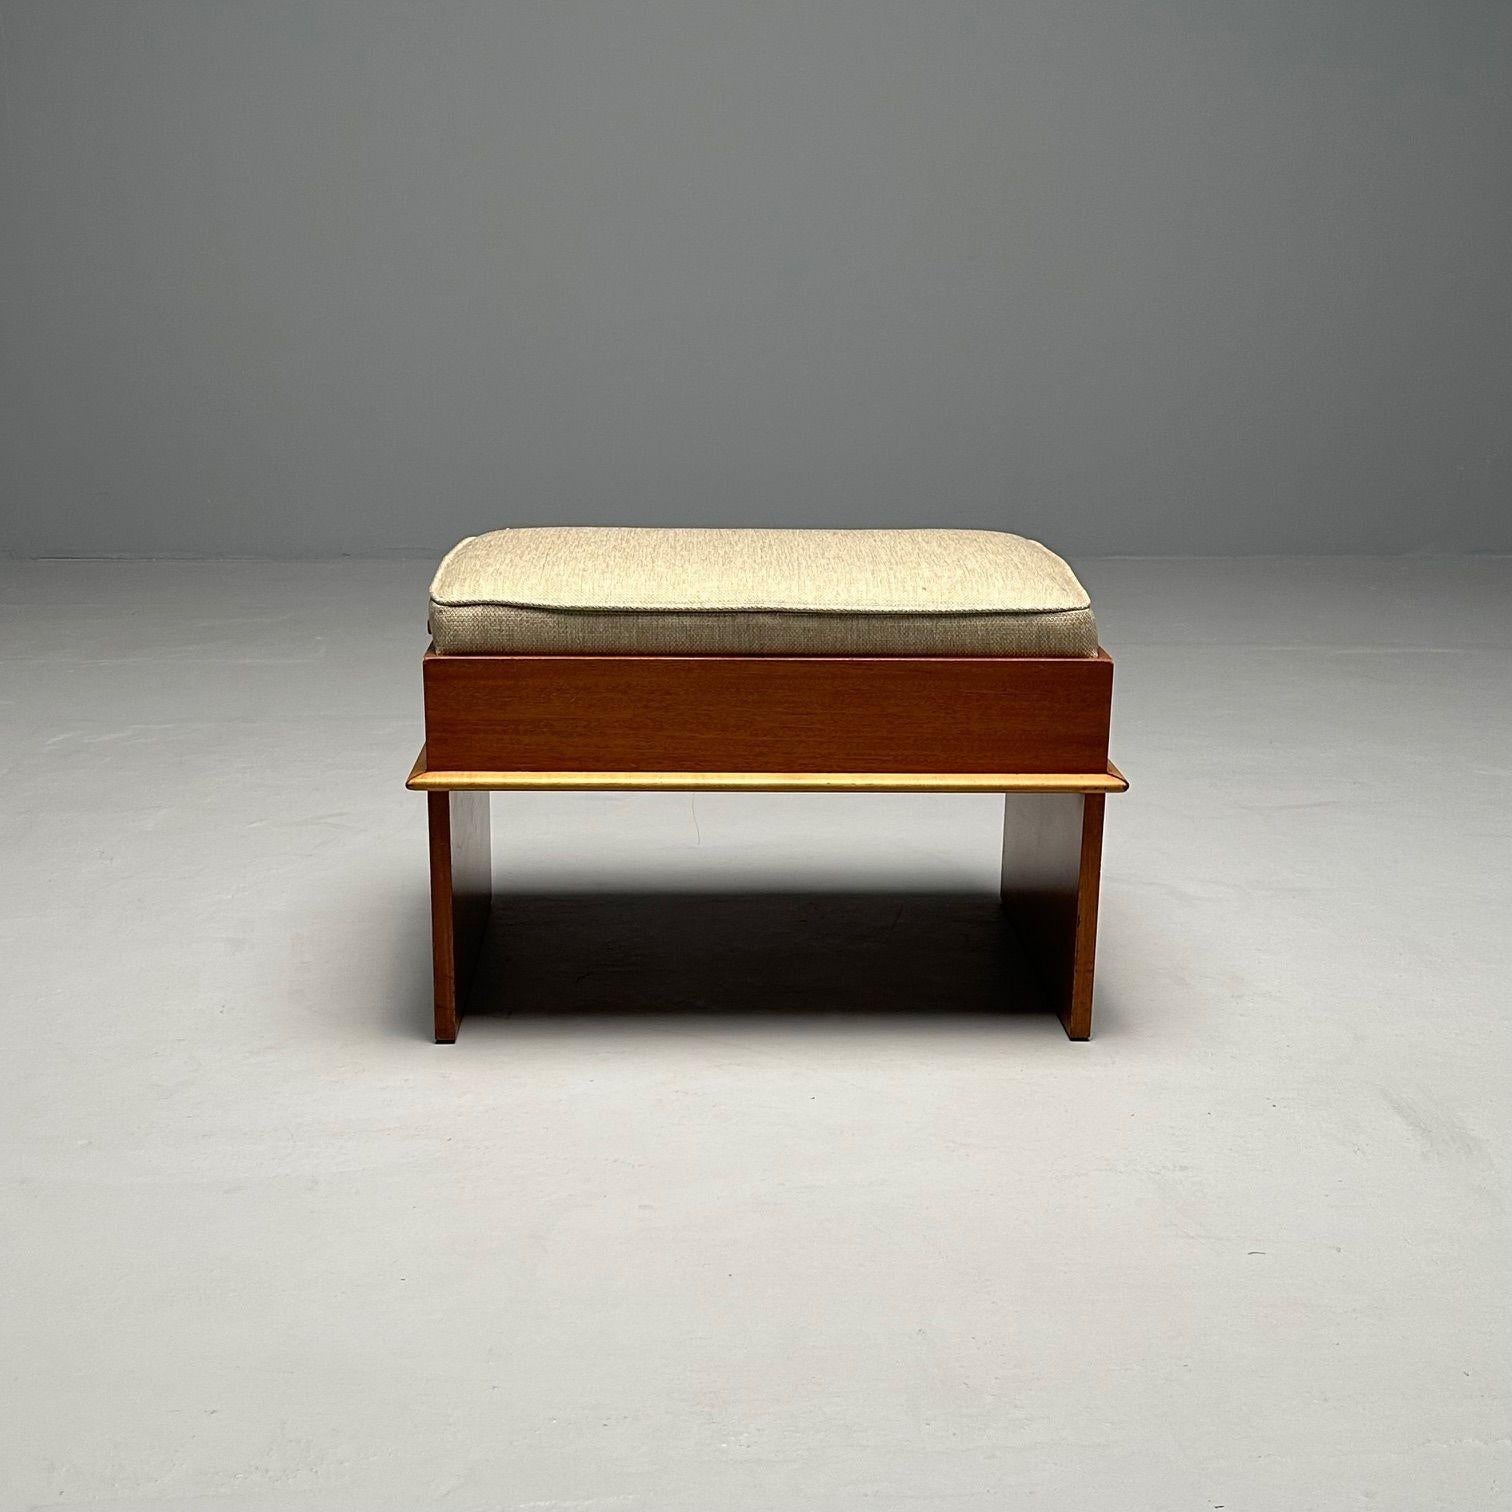 Paul Frankl, Johnson Furniture, Station Wagon Bench, Rock Maple, Fabric, 1950s For Sale 1